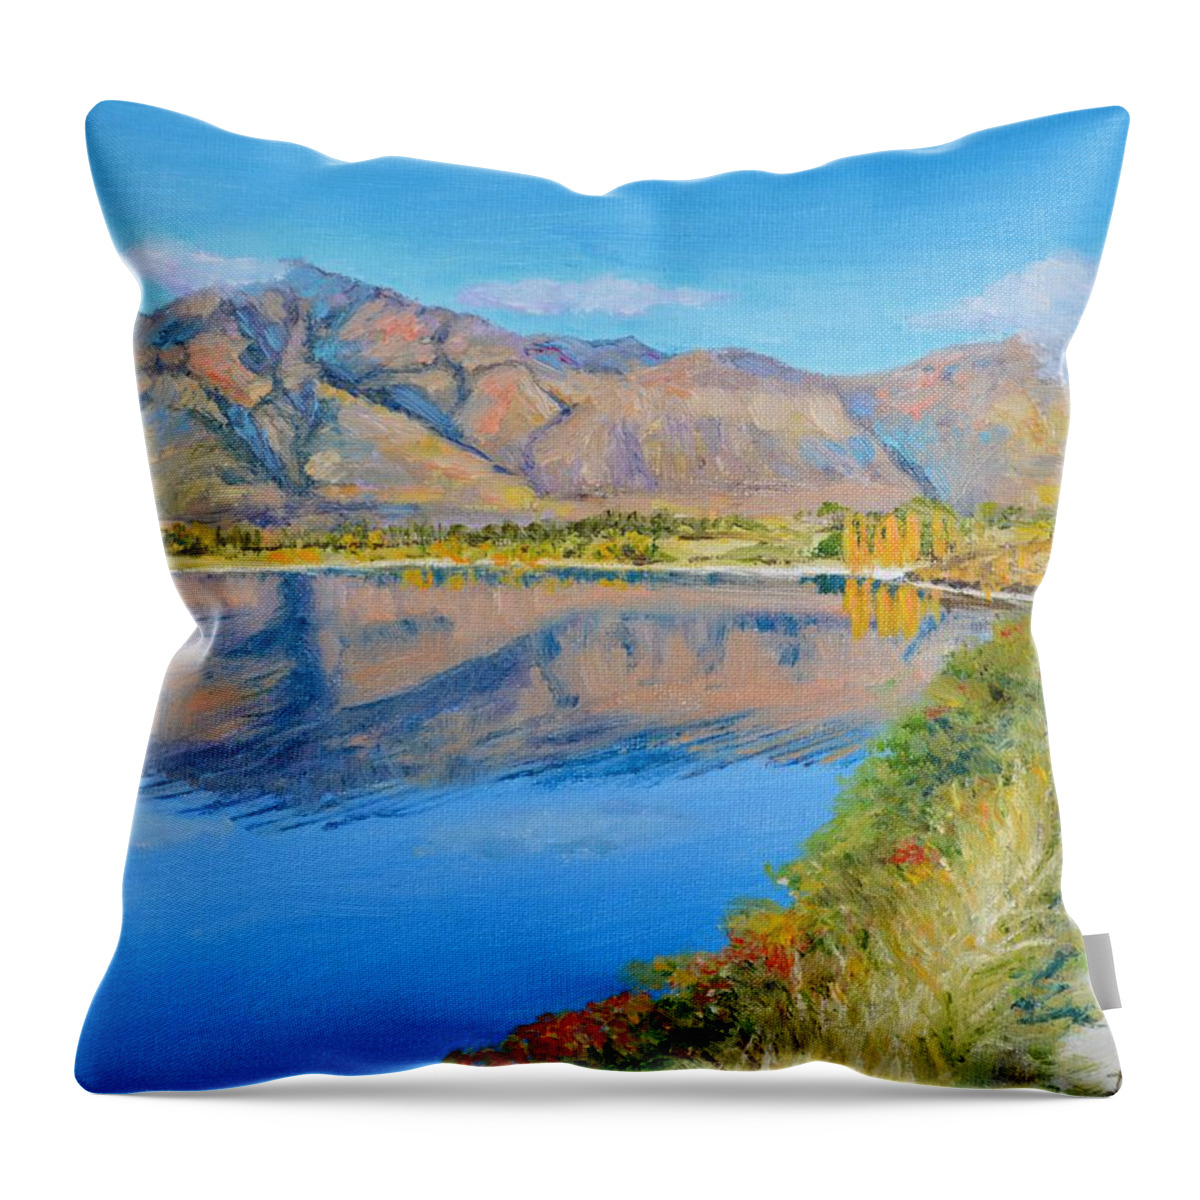 Mountains Throw Pillow featuring the painting Lake Wanaka Morning Reflections by Dai Wynn